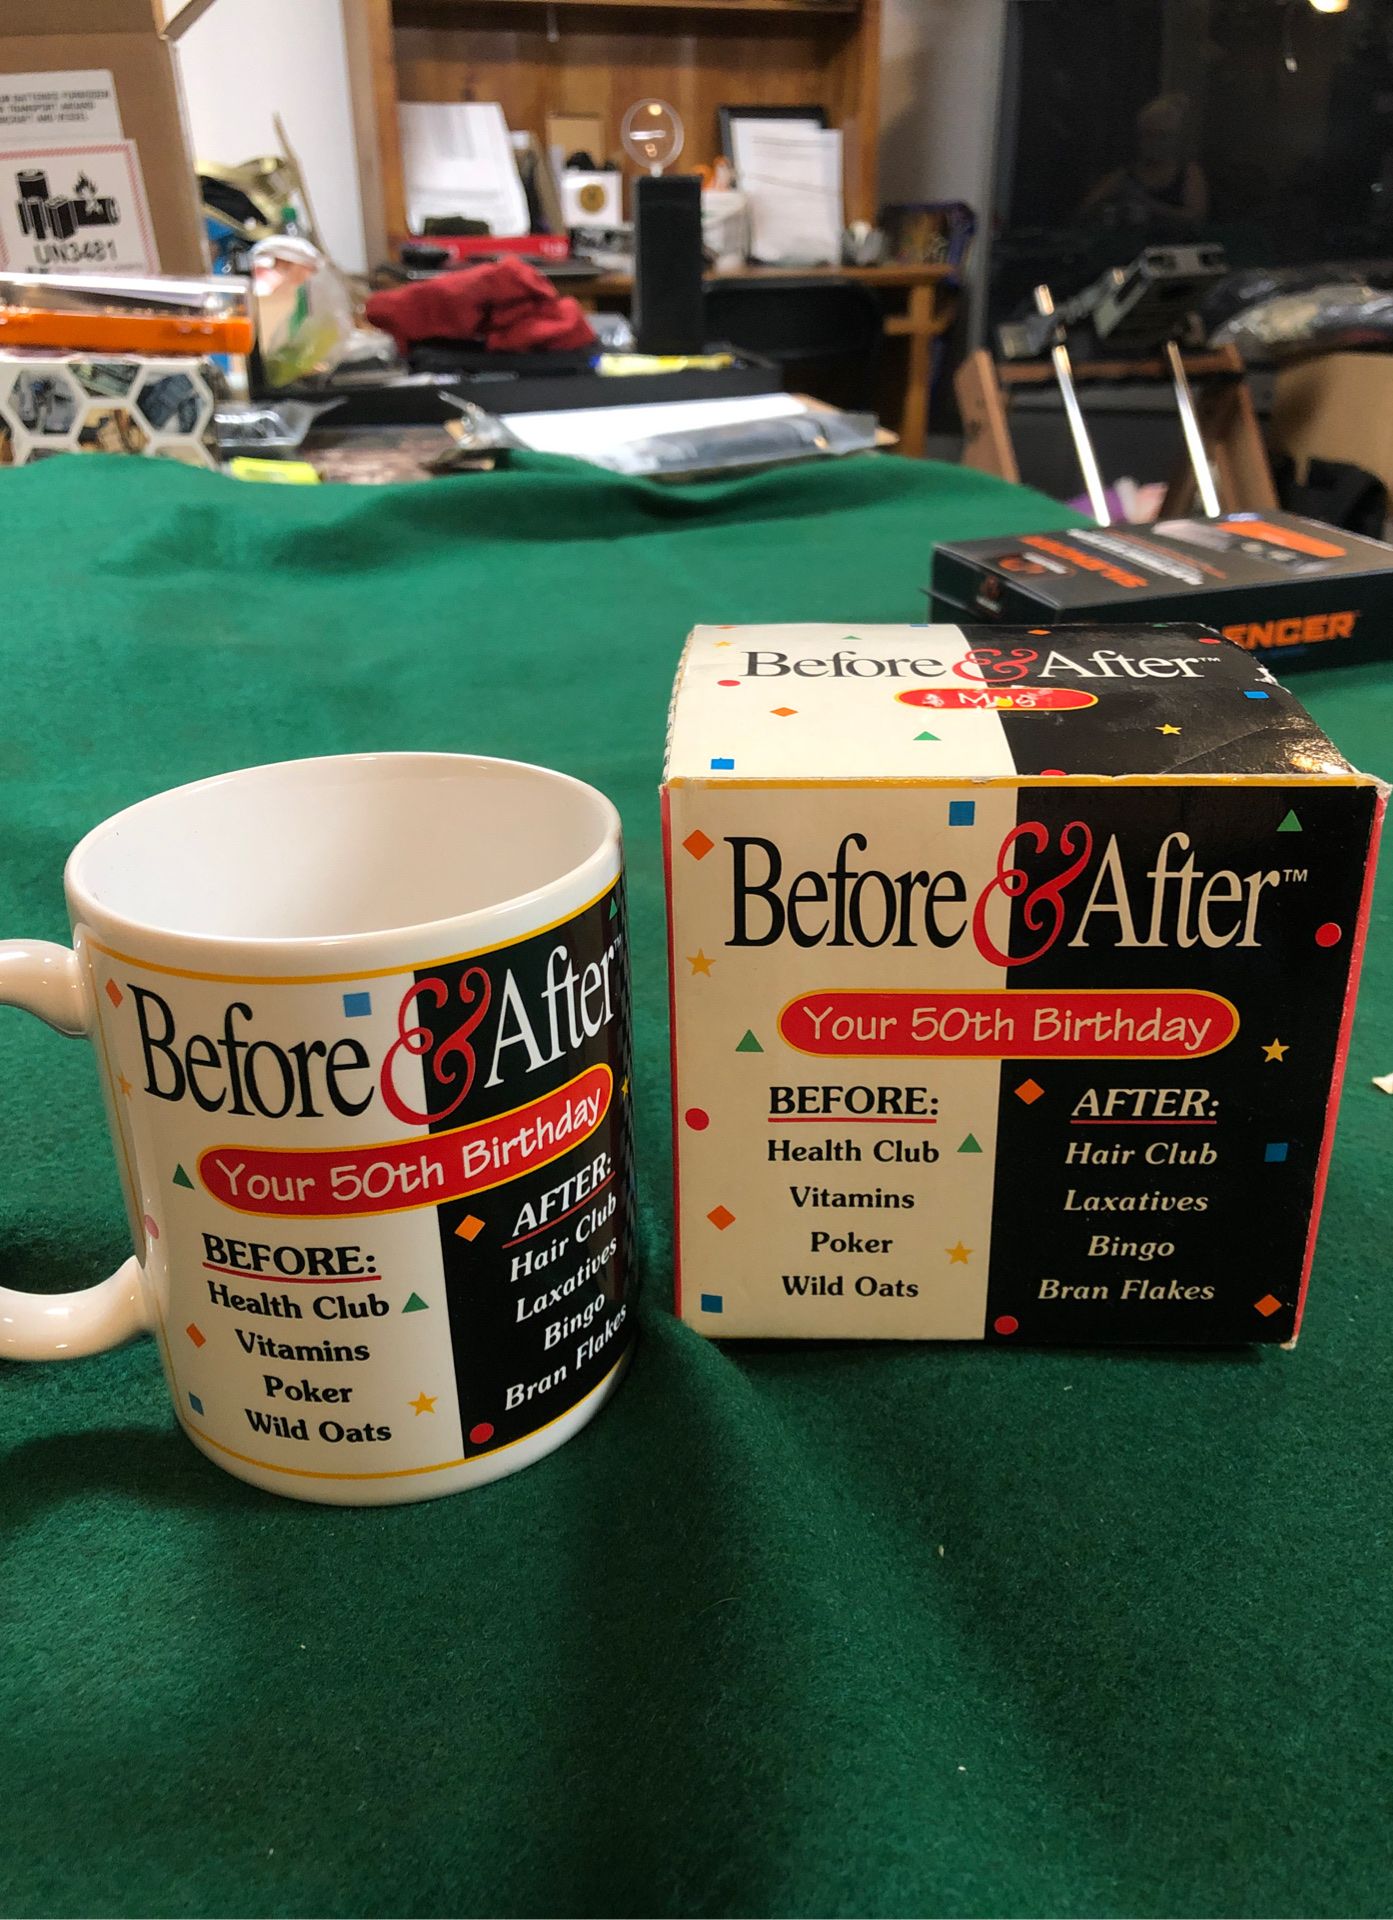 Man 50th birthday gag gift before & after coffee cup